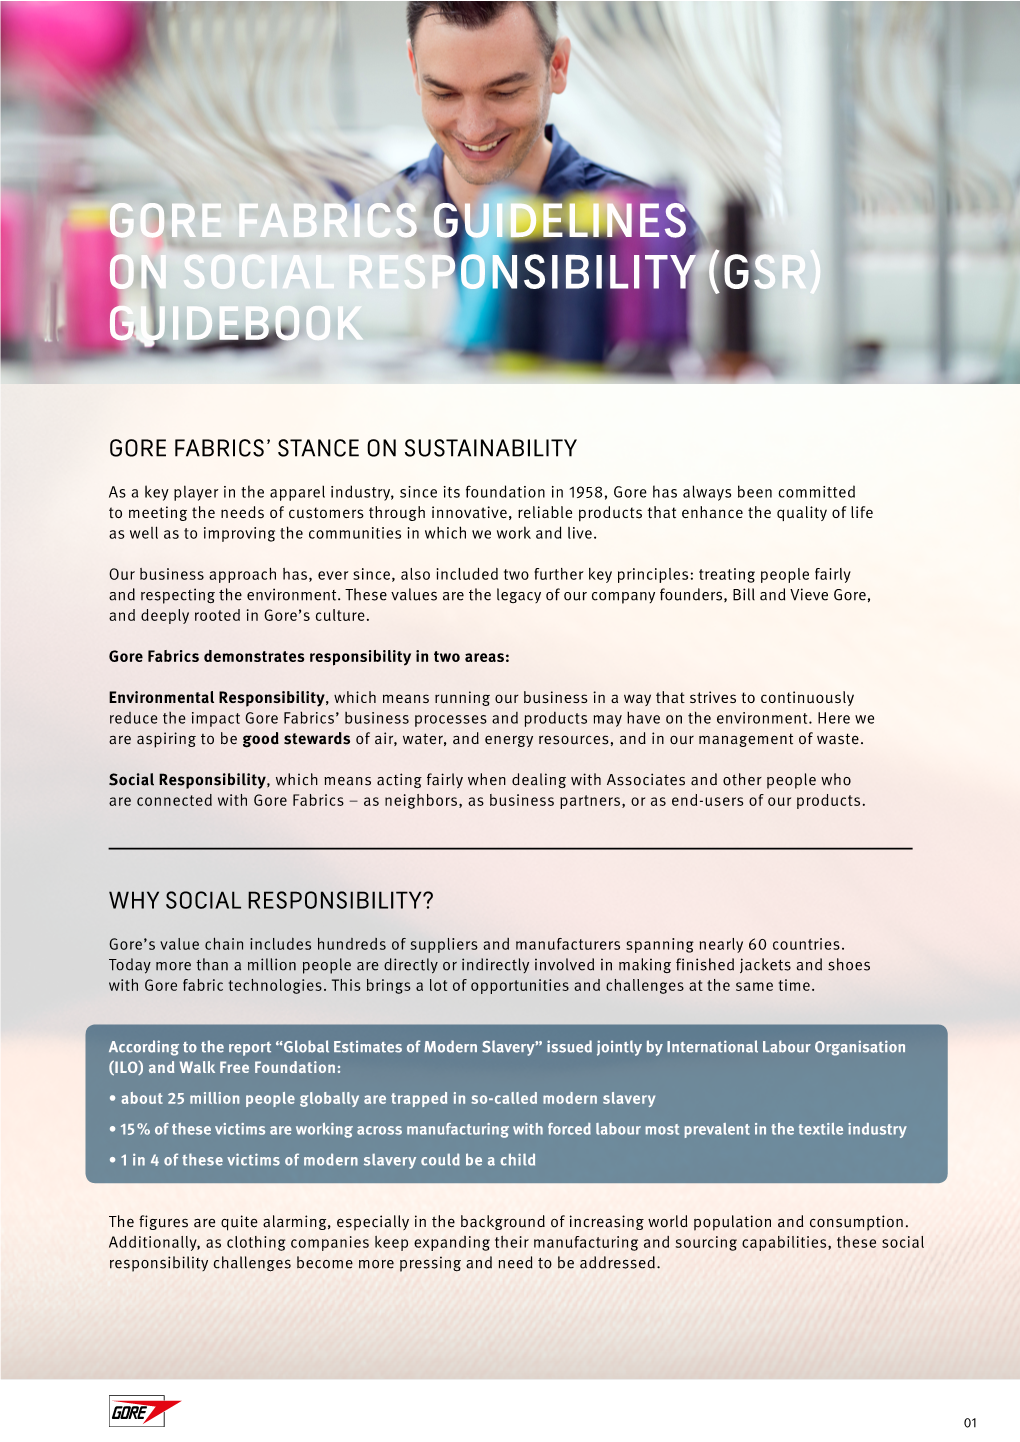 Gore Fabrics Guidelines on Social Responsibility (Gsr) Guidebook